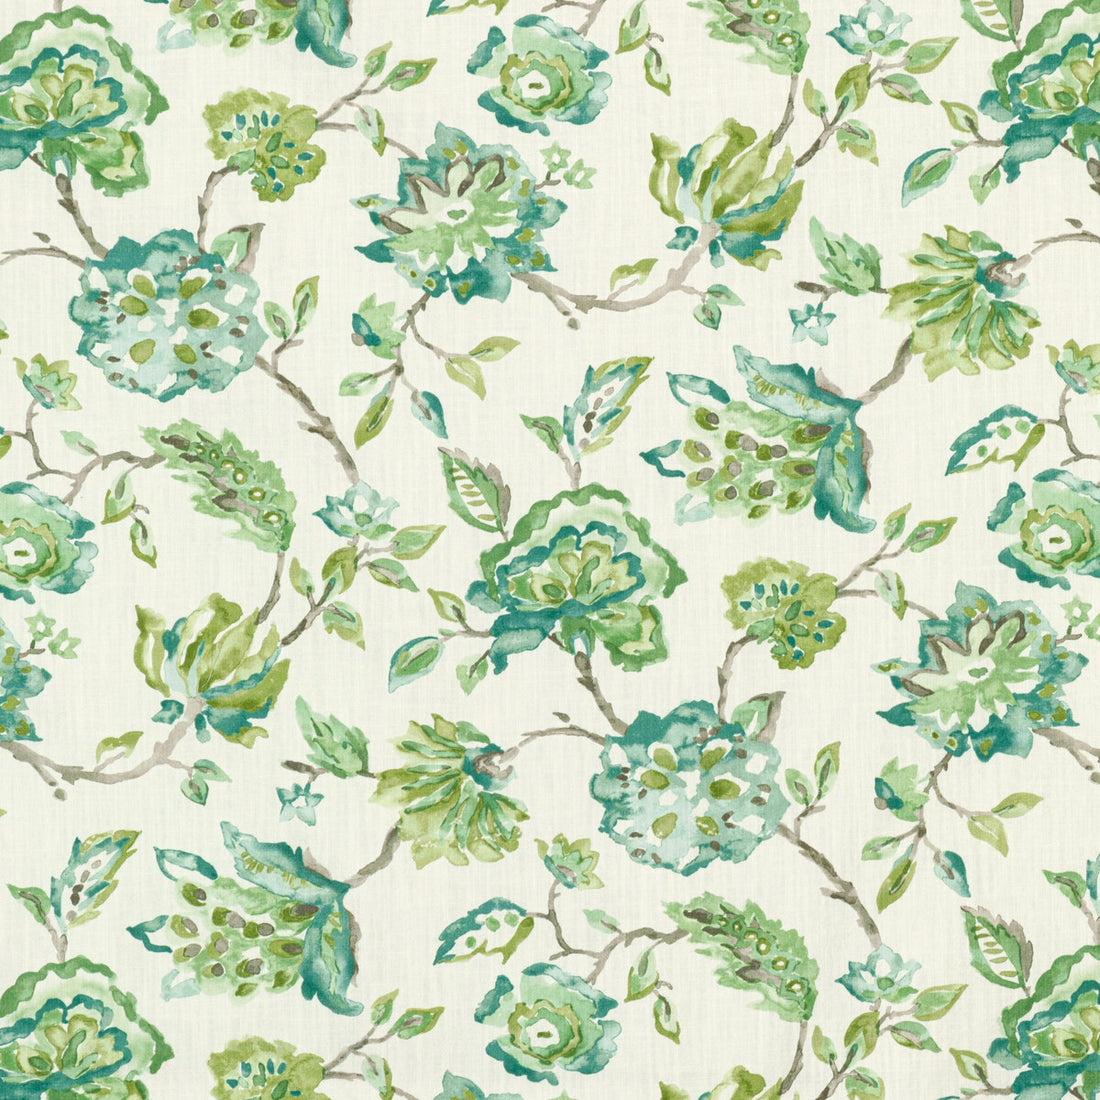 Etheria fabric in arboretum color - pattern ETHERIA.13.0 - by Kravet Basics in the Monterey collection